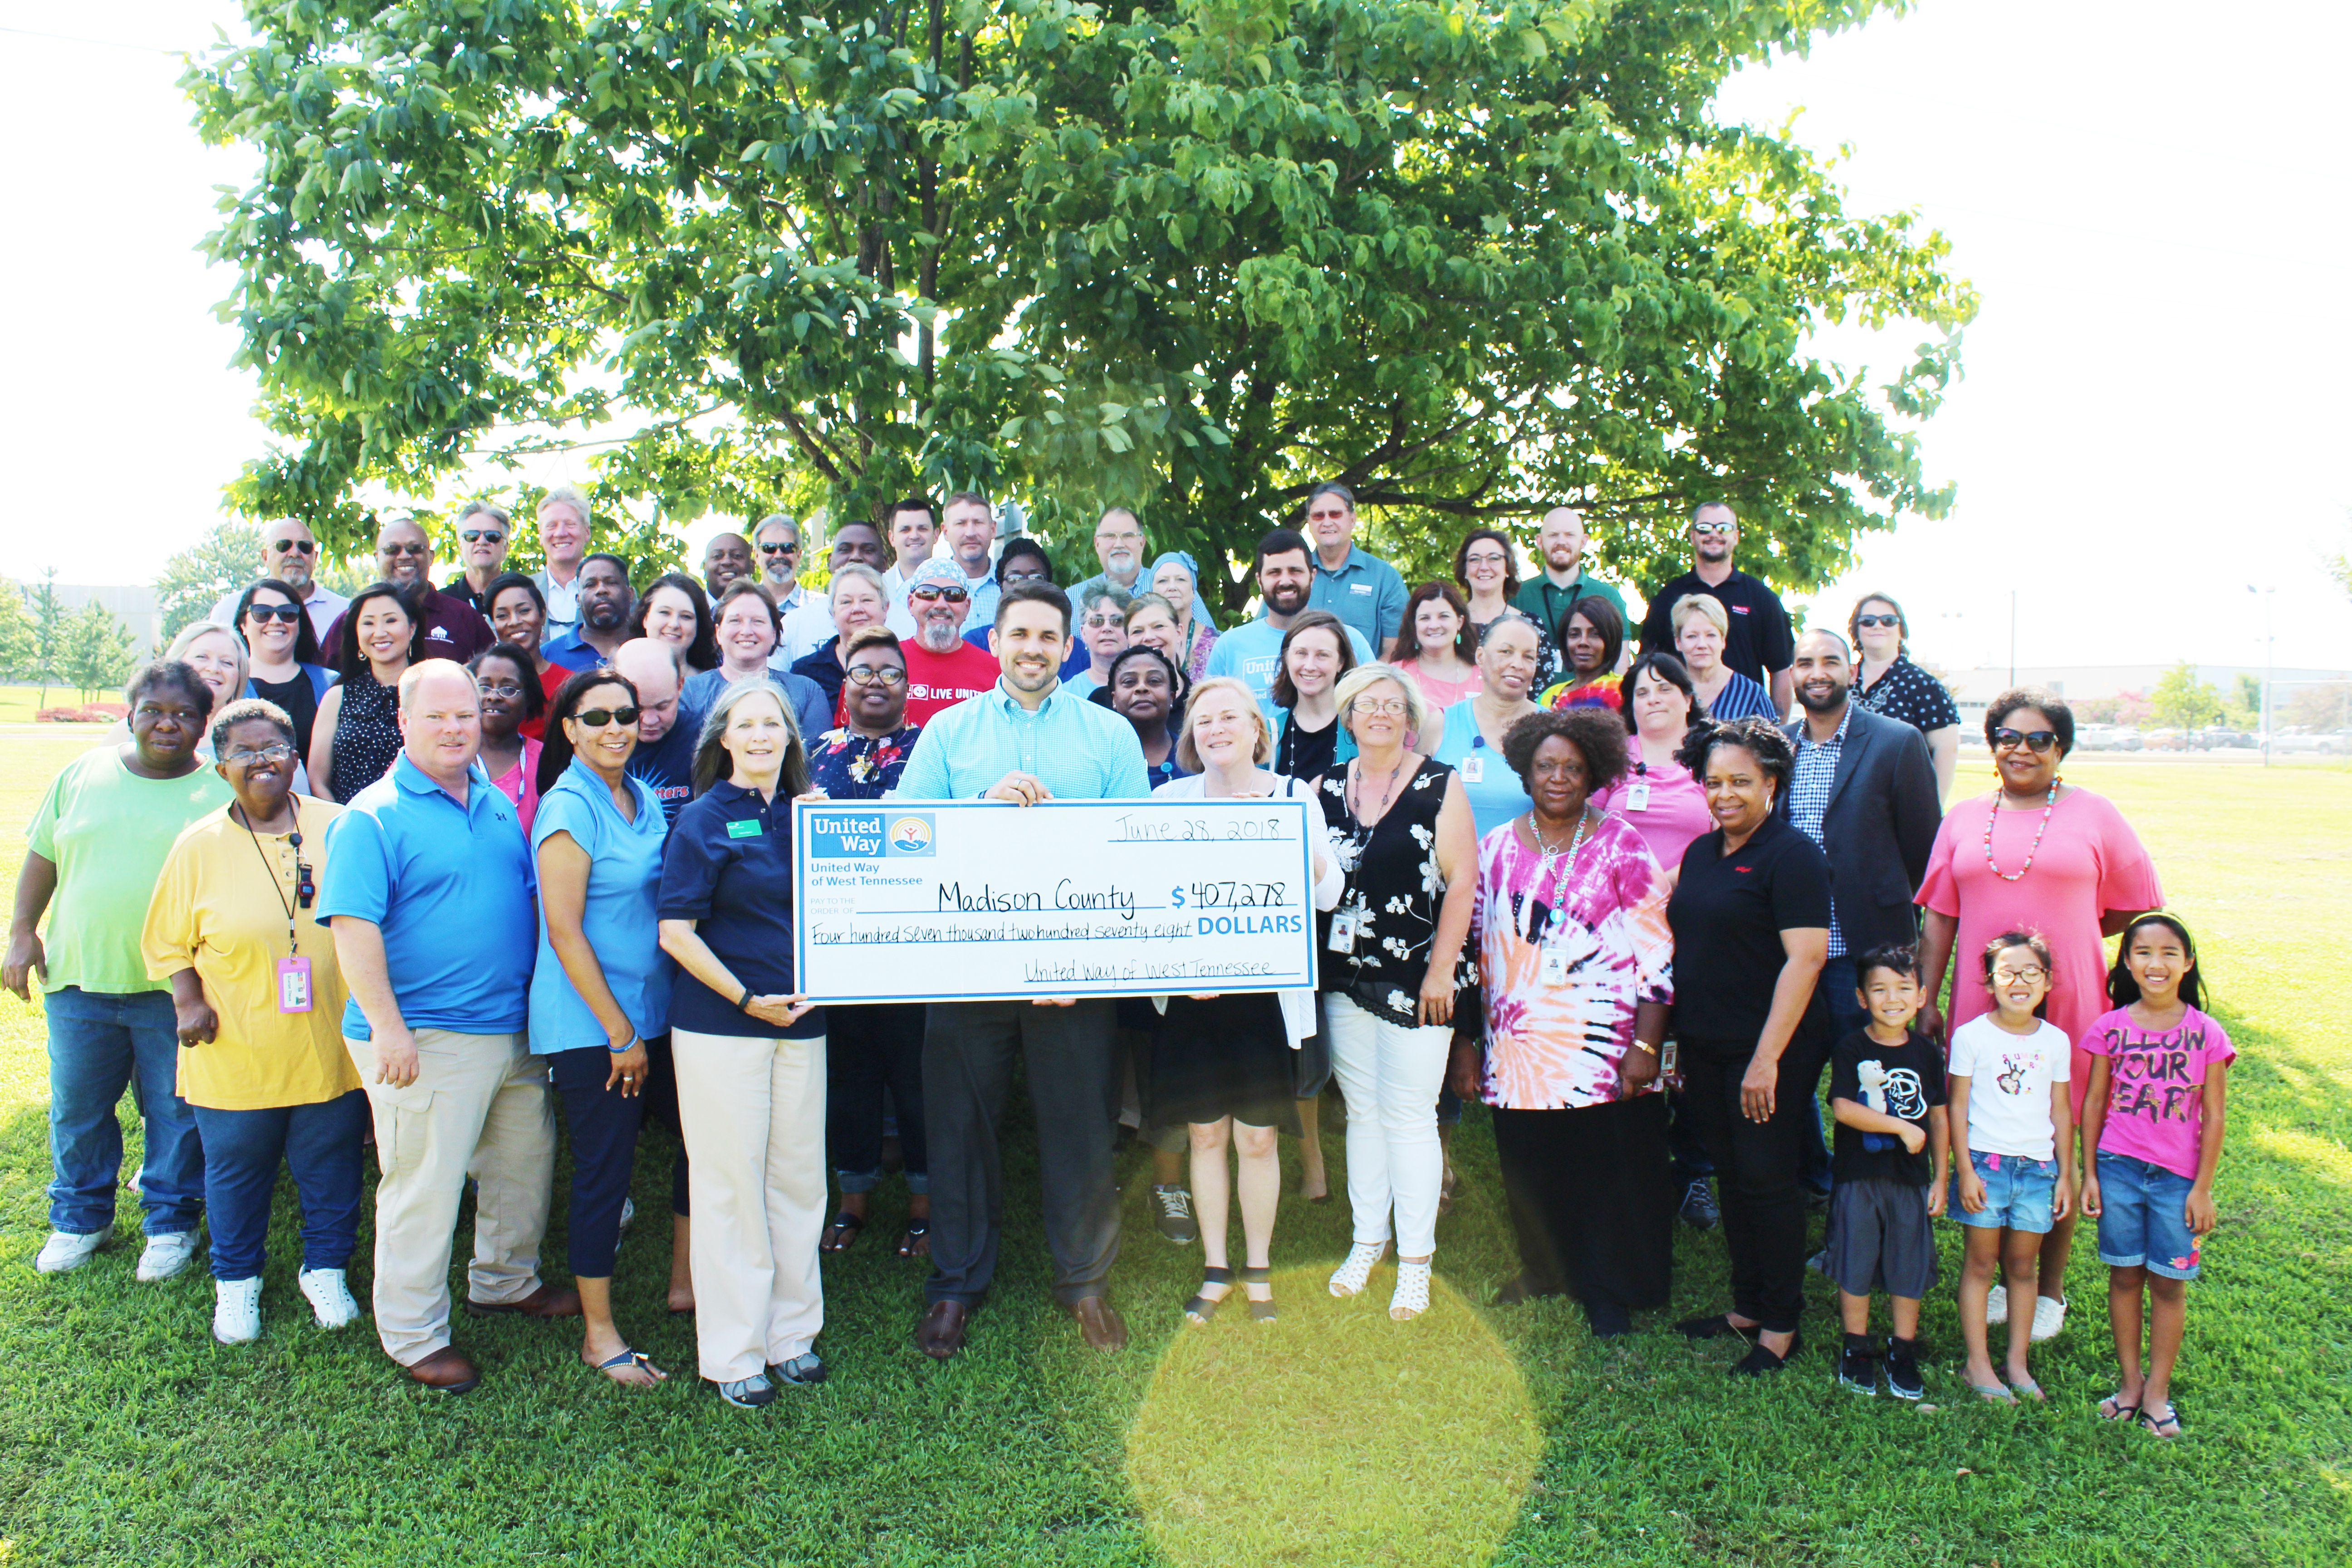 United Way invests $400k in Madison County during Community Impact Season